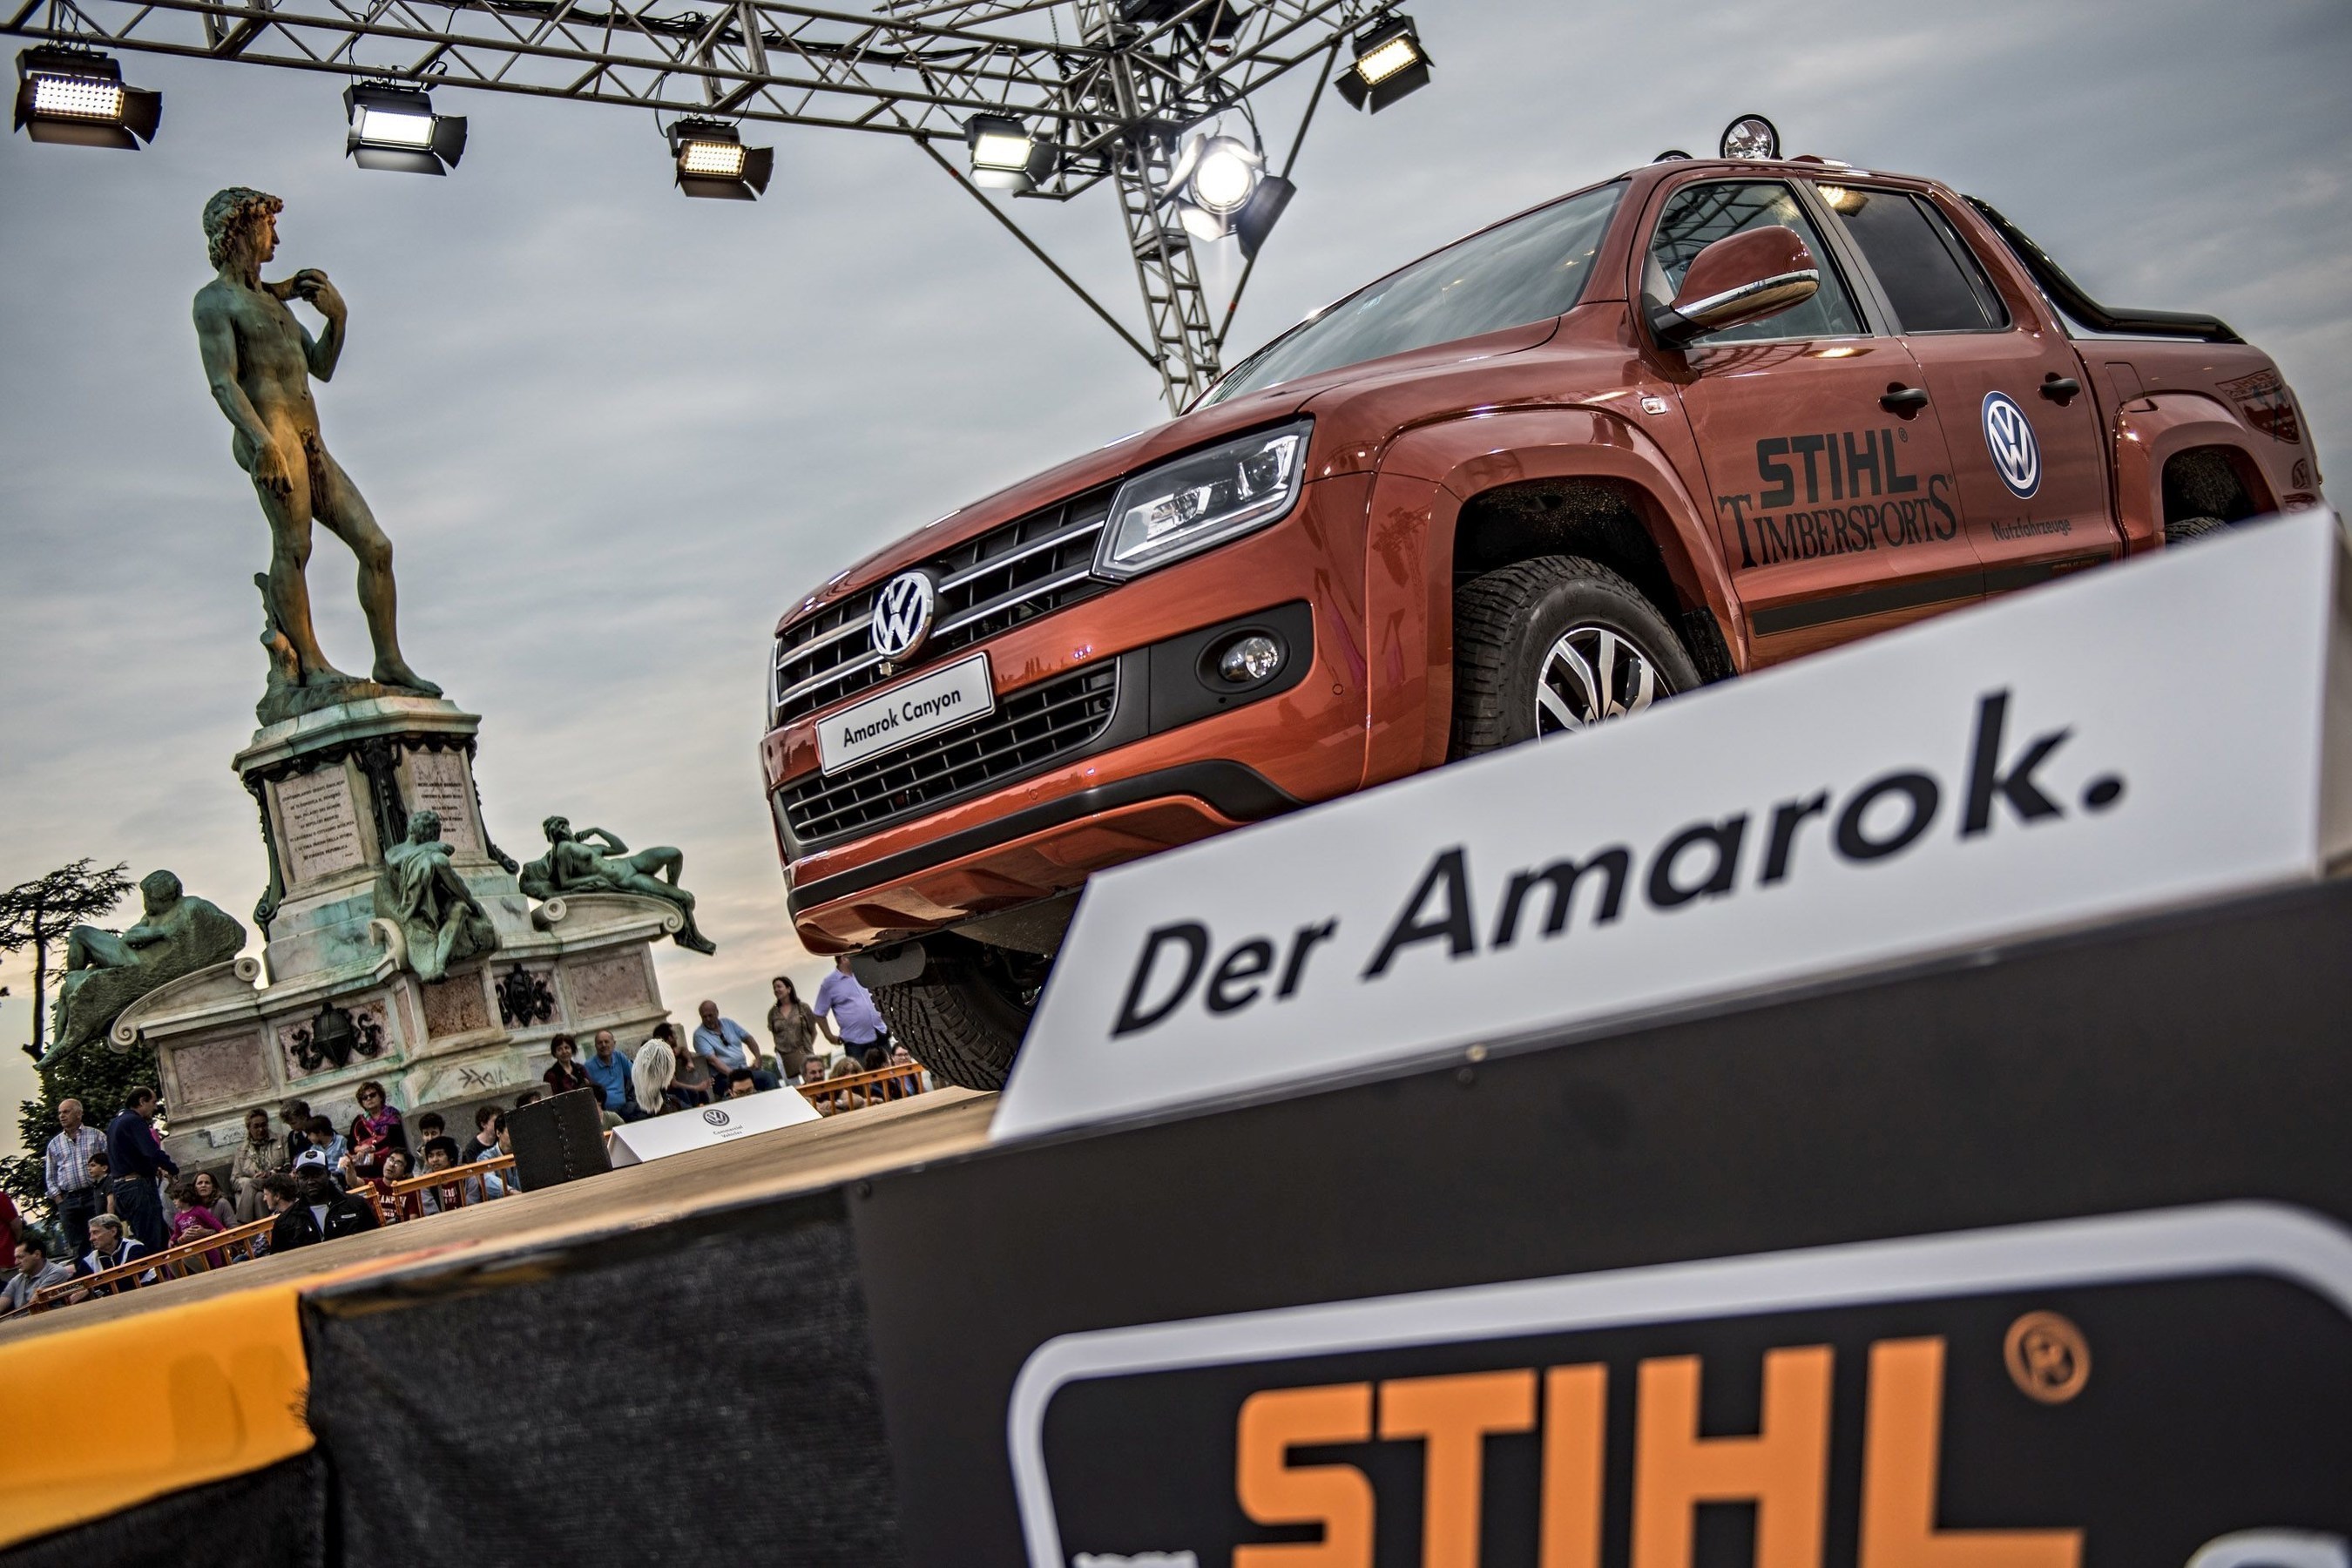 The STIHL TIMBERSPORTS(R) Series and Volkswagen Commercial Vehicles are cooperating in the elite division of lumberjack sports. During the 2015 Champions Trophy in Florence, Italy, Volkswagen Commercial Vehicles appeared for the first time at an international competition. (PRNewsFoto/STIHL TIMBERSPORTS Series) (PRNewsFoto/STIHL TIMBERSPORTS Series)